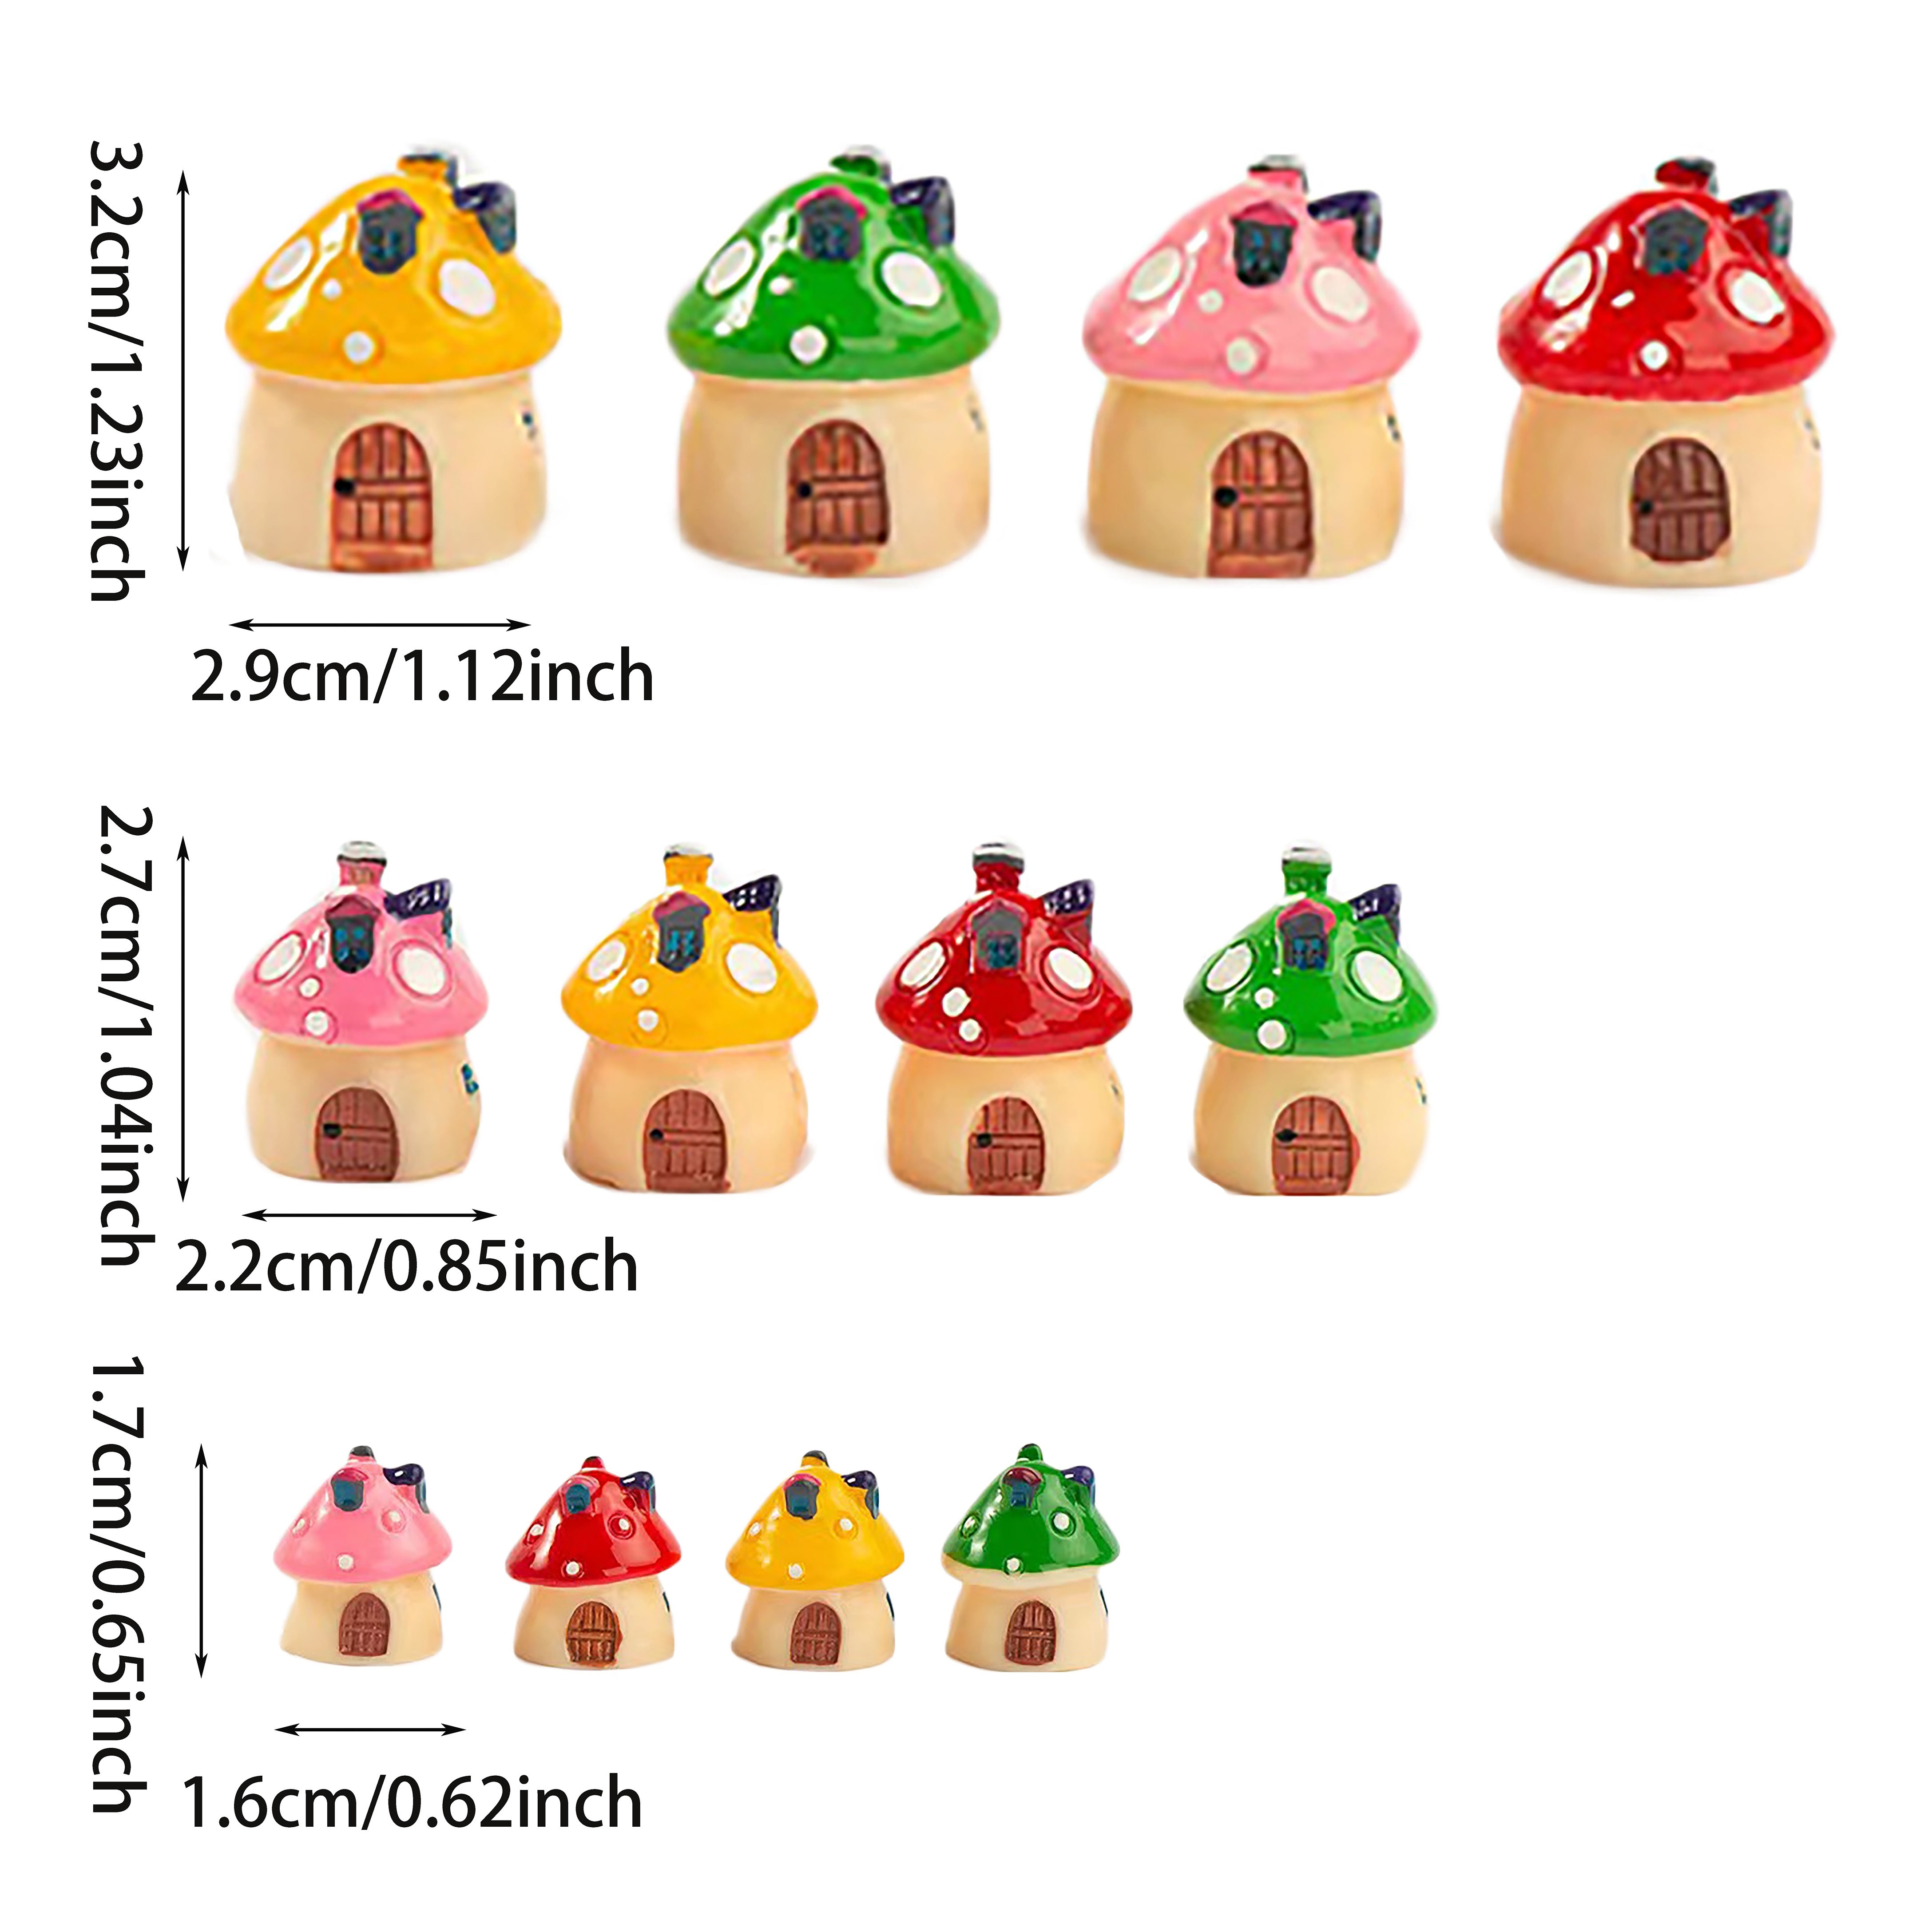 Hobby & Craft :: Resin Crafts :: Molds :: 1pc Mushroom Forest Mix